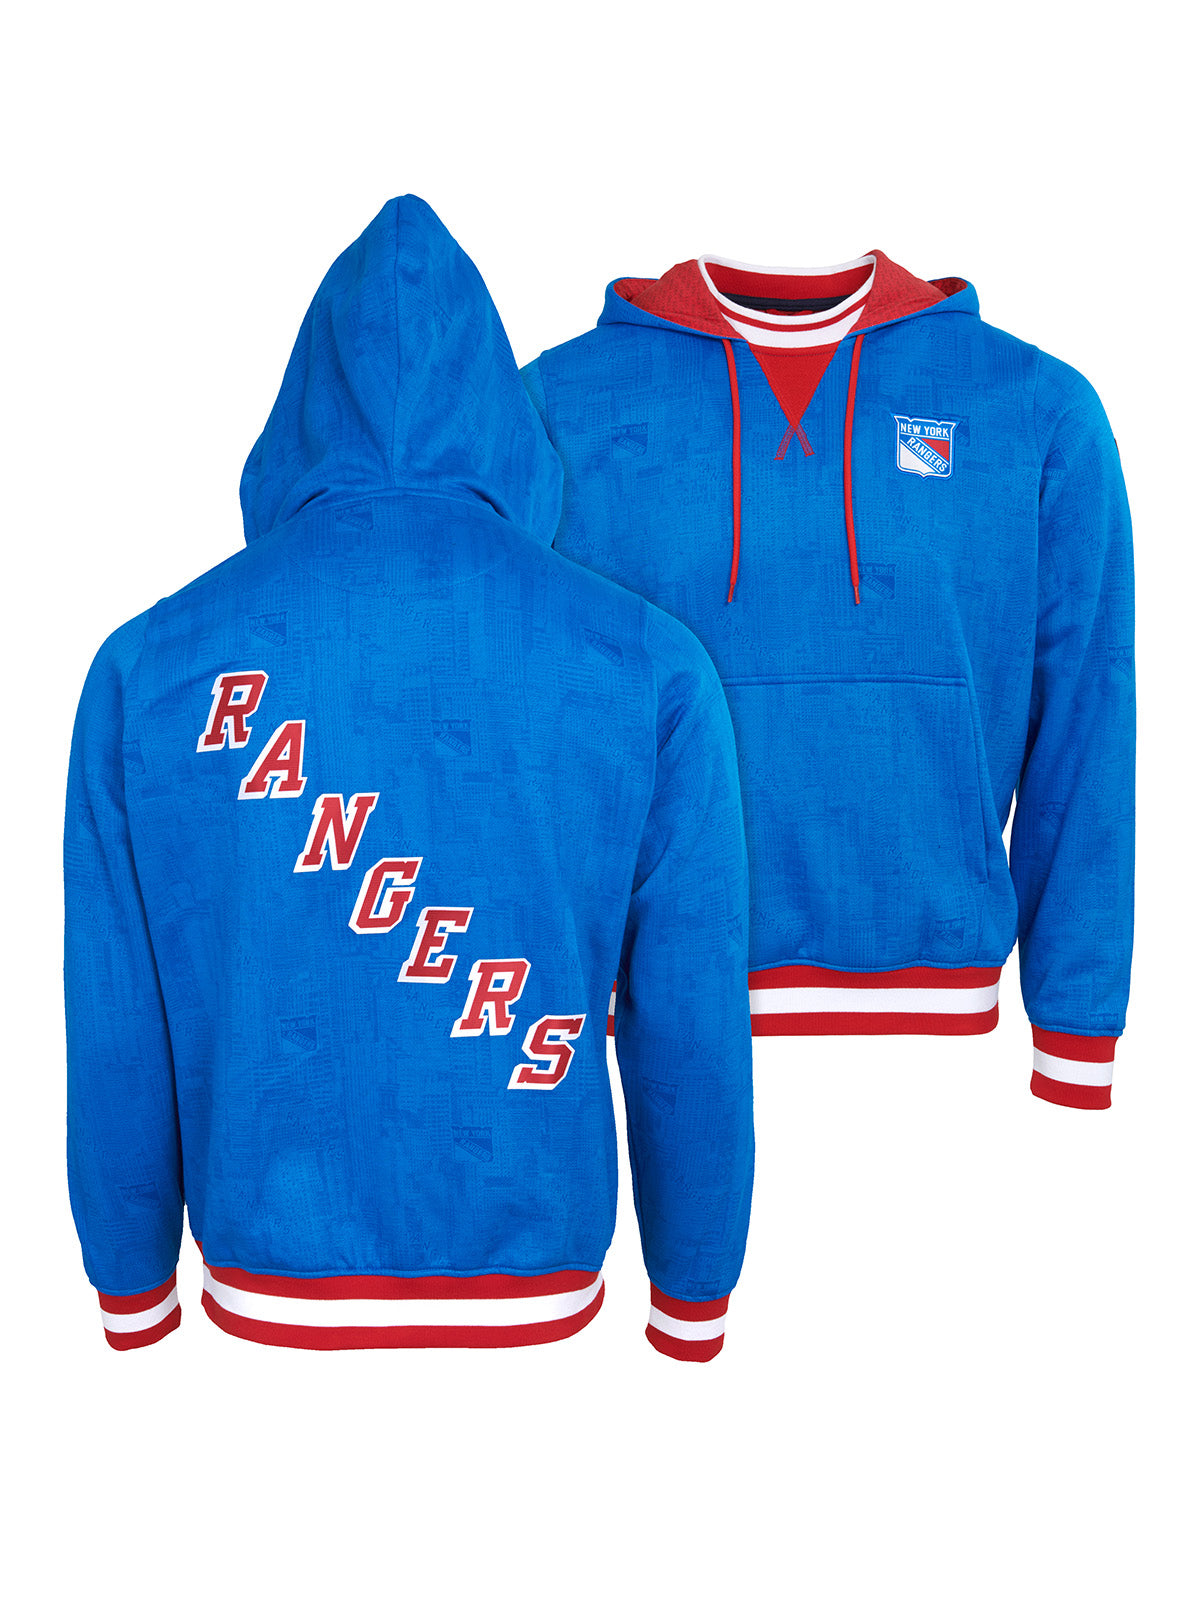 New York Rangers Hoodie - Show your team spirit, with the iconic team logo patch on the front and back, and proudly display your New York Rangers support in their team colors with this NHL hockey hoodie.